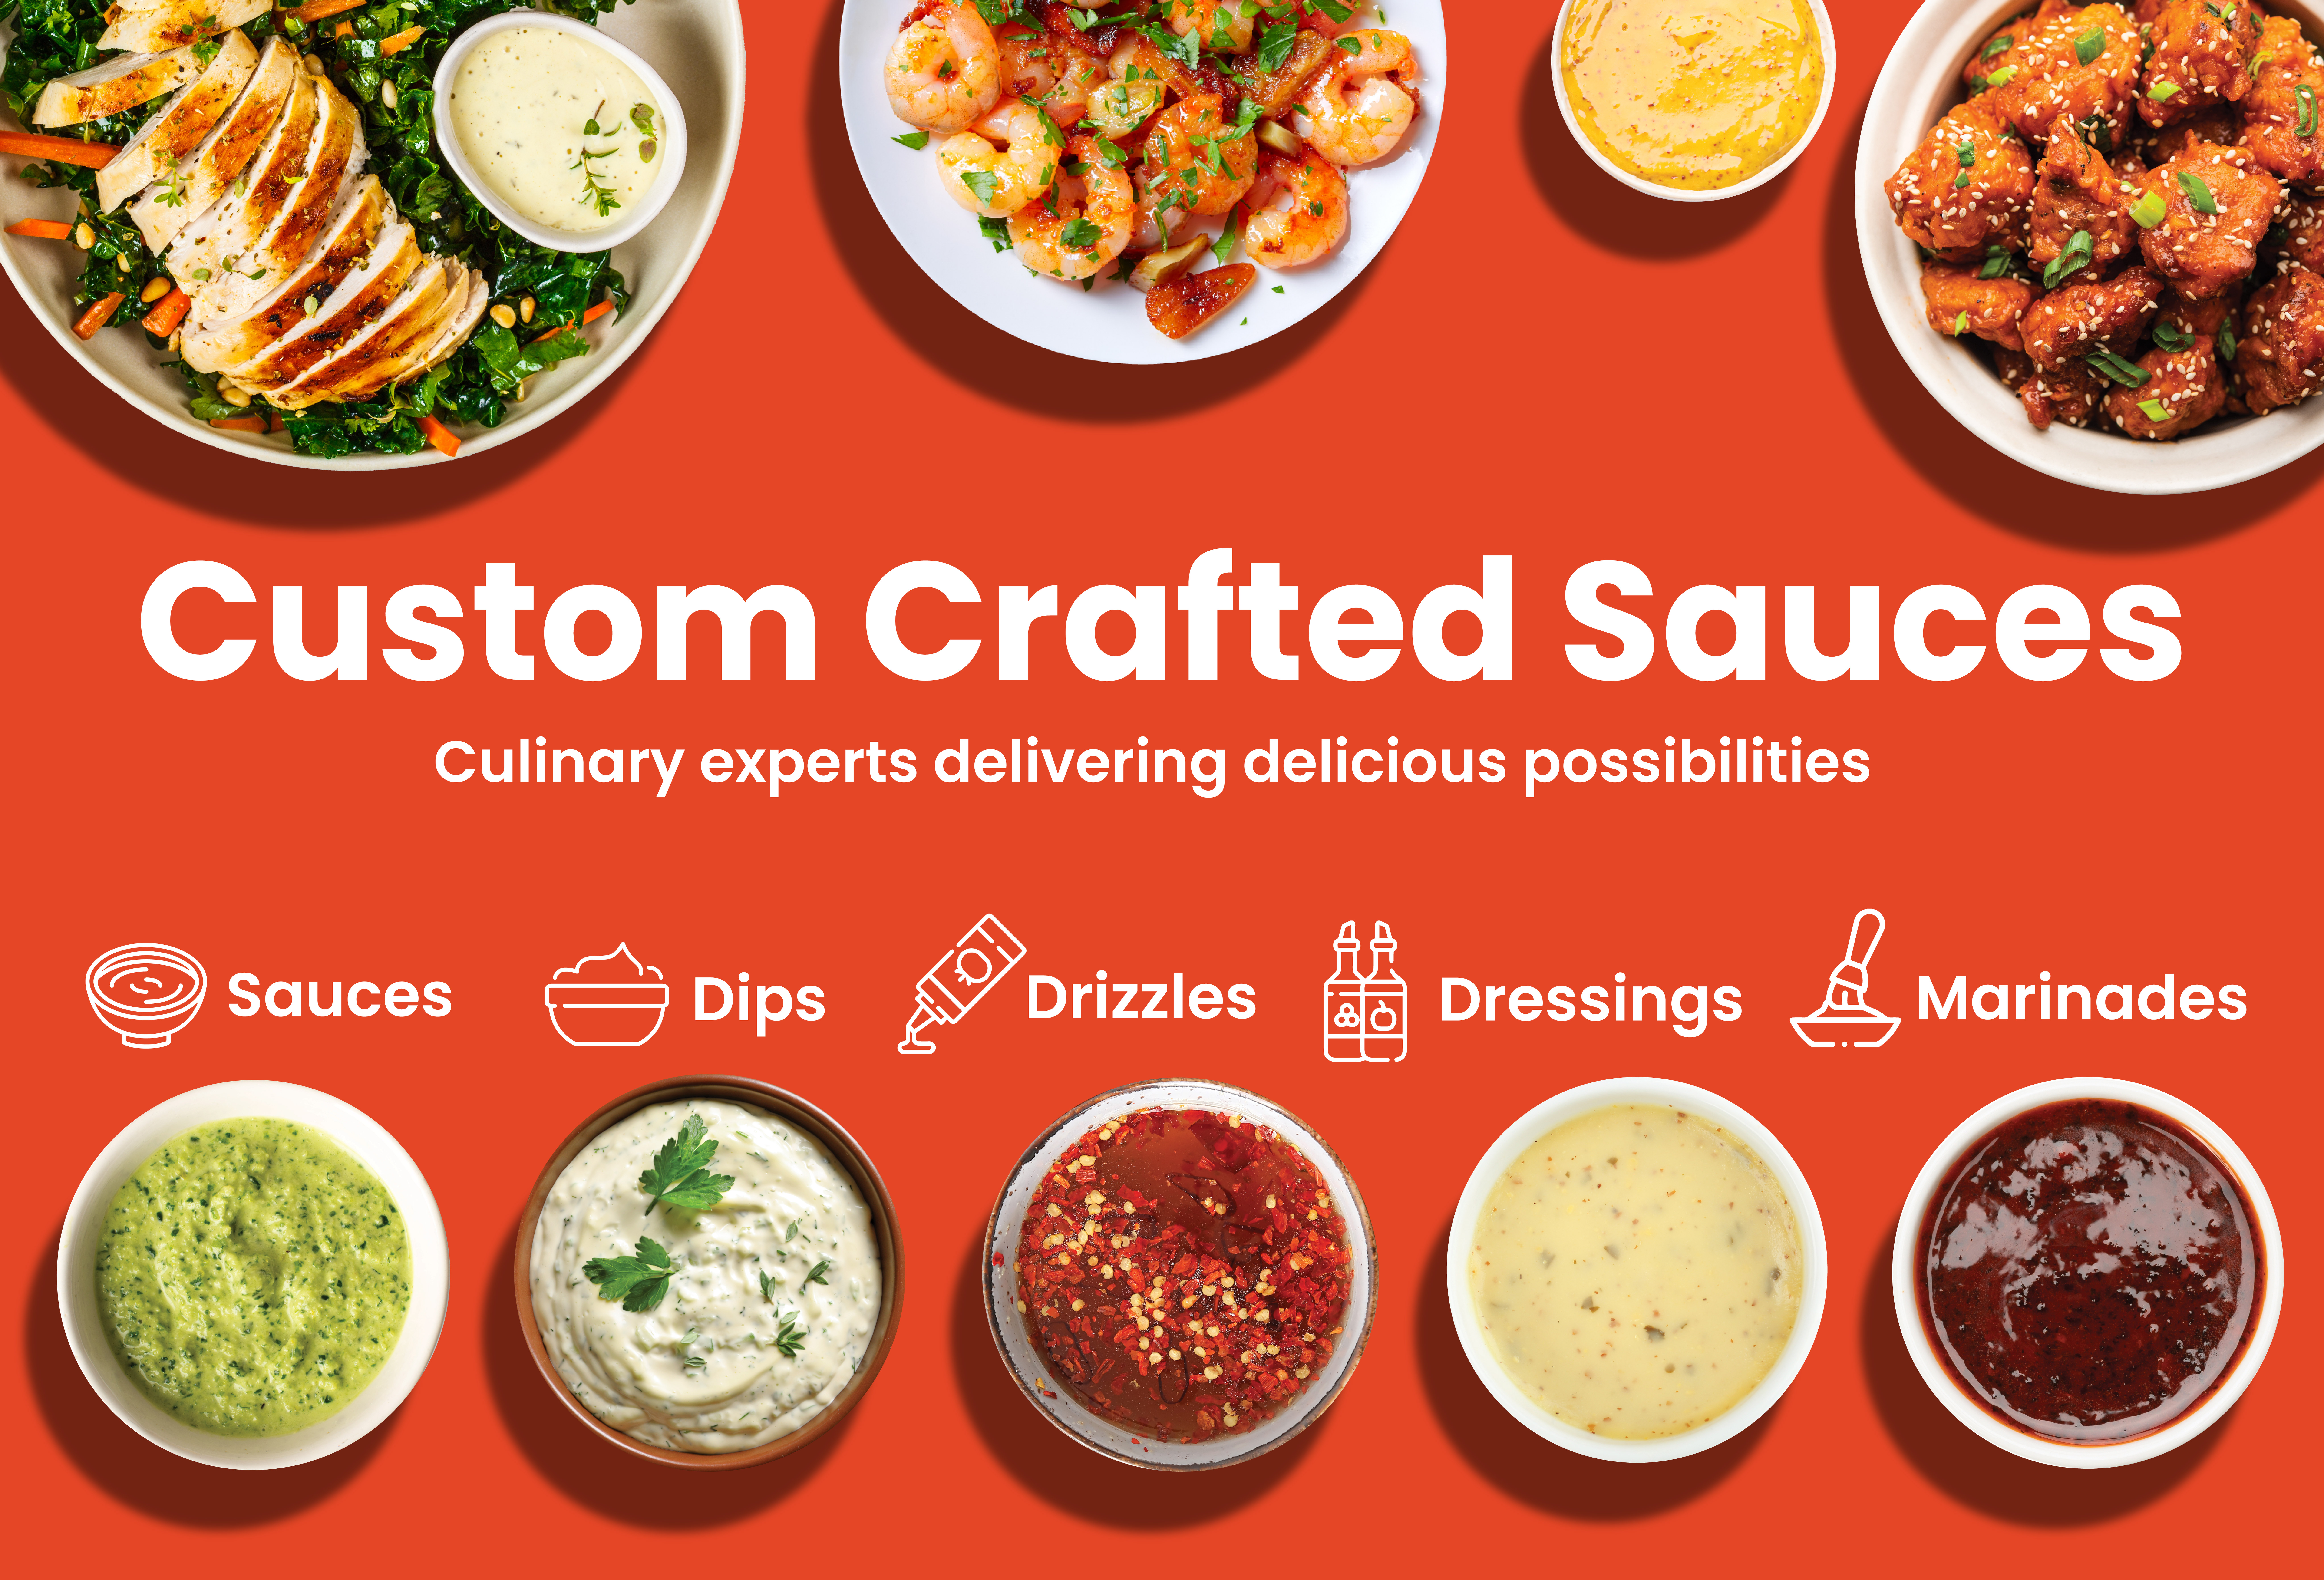 Custom-crafted-sauces-dips-dressings-drizzles-marinades